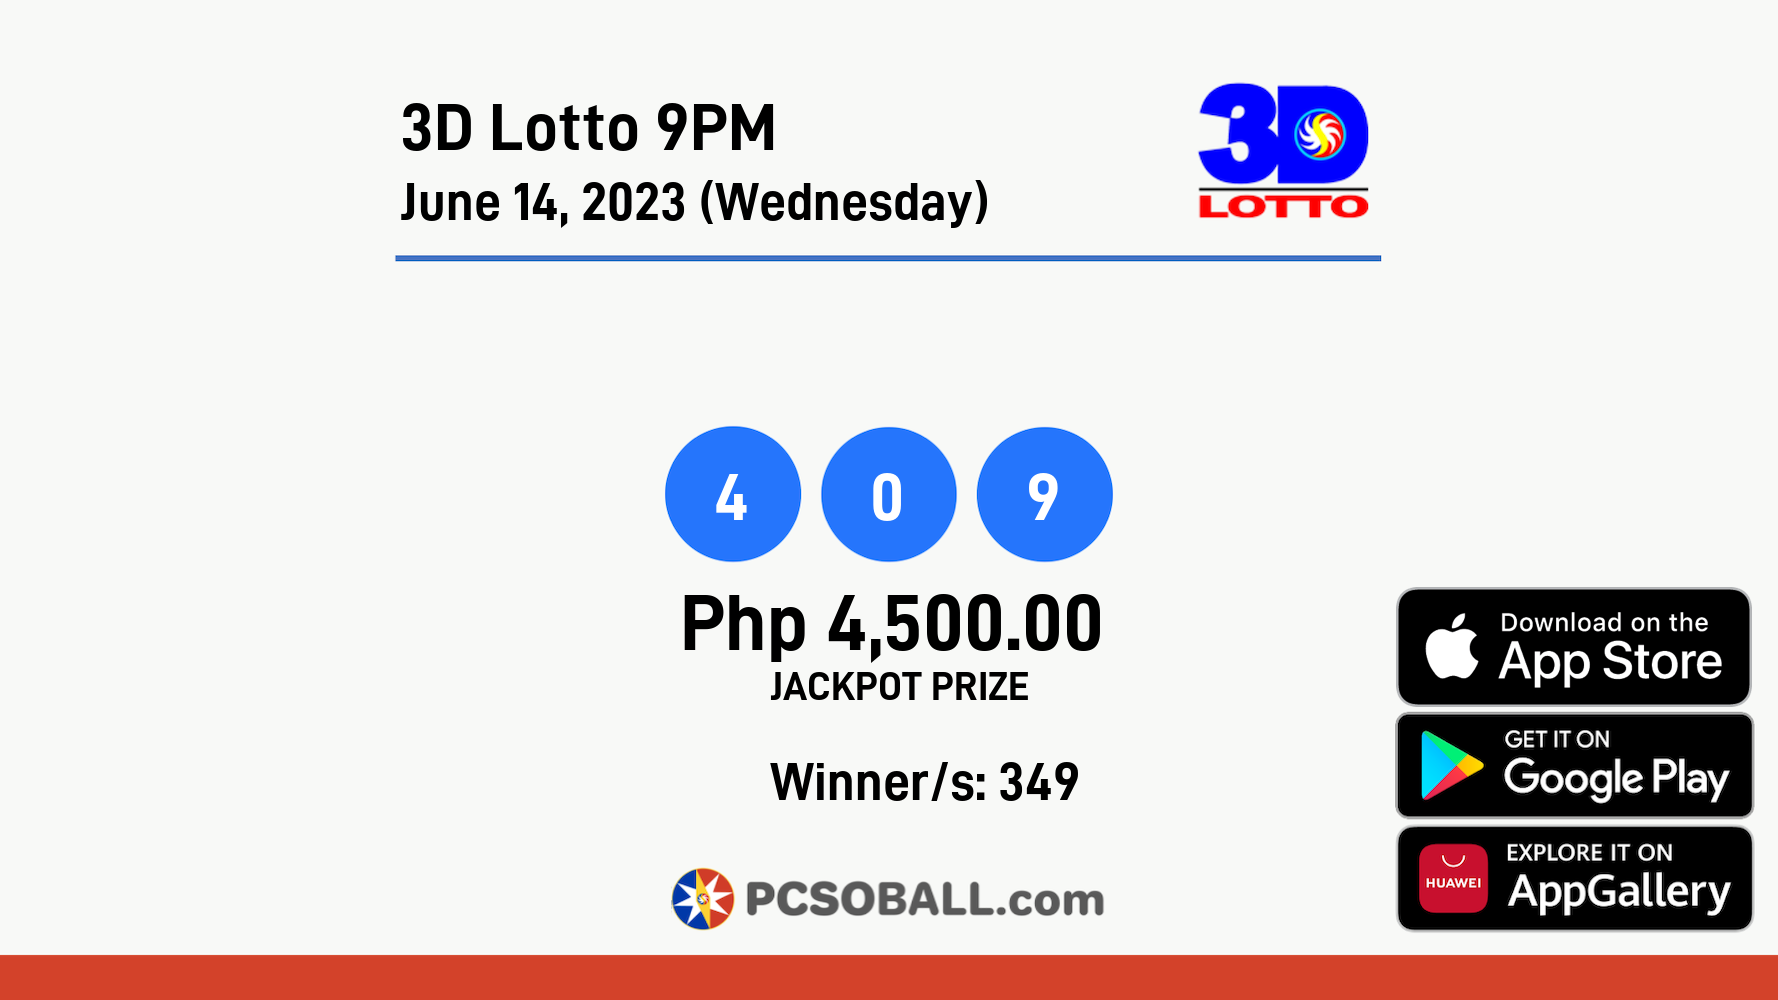 3D Lotto 9PM June 14, 2023 (Wednesday) Result